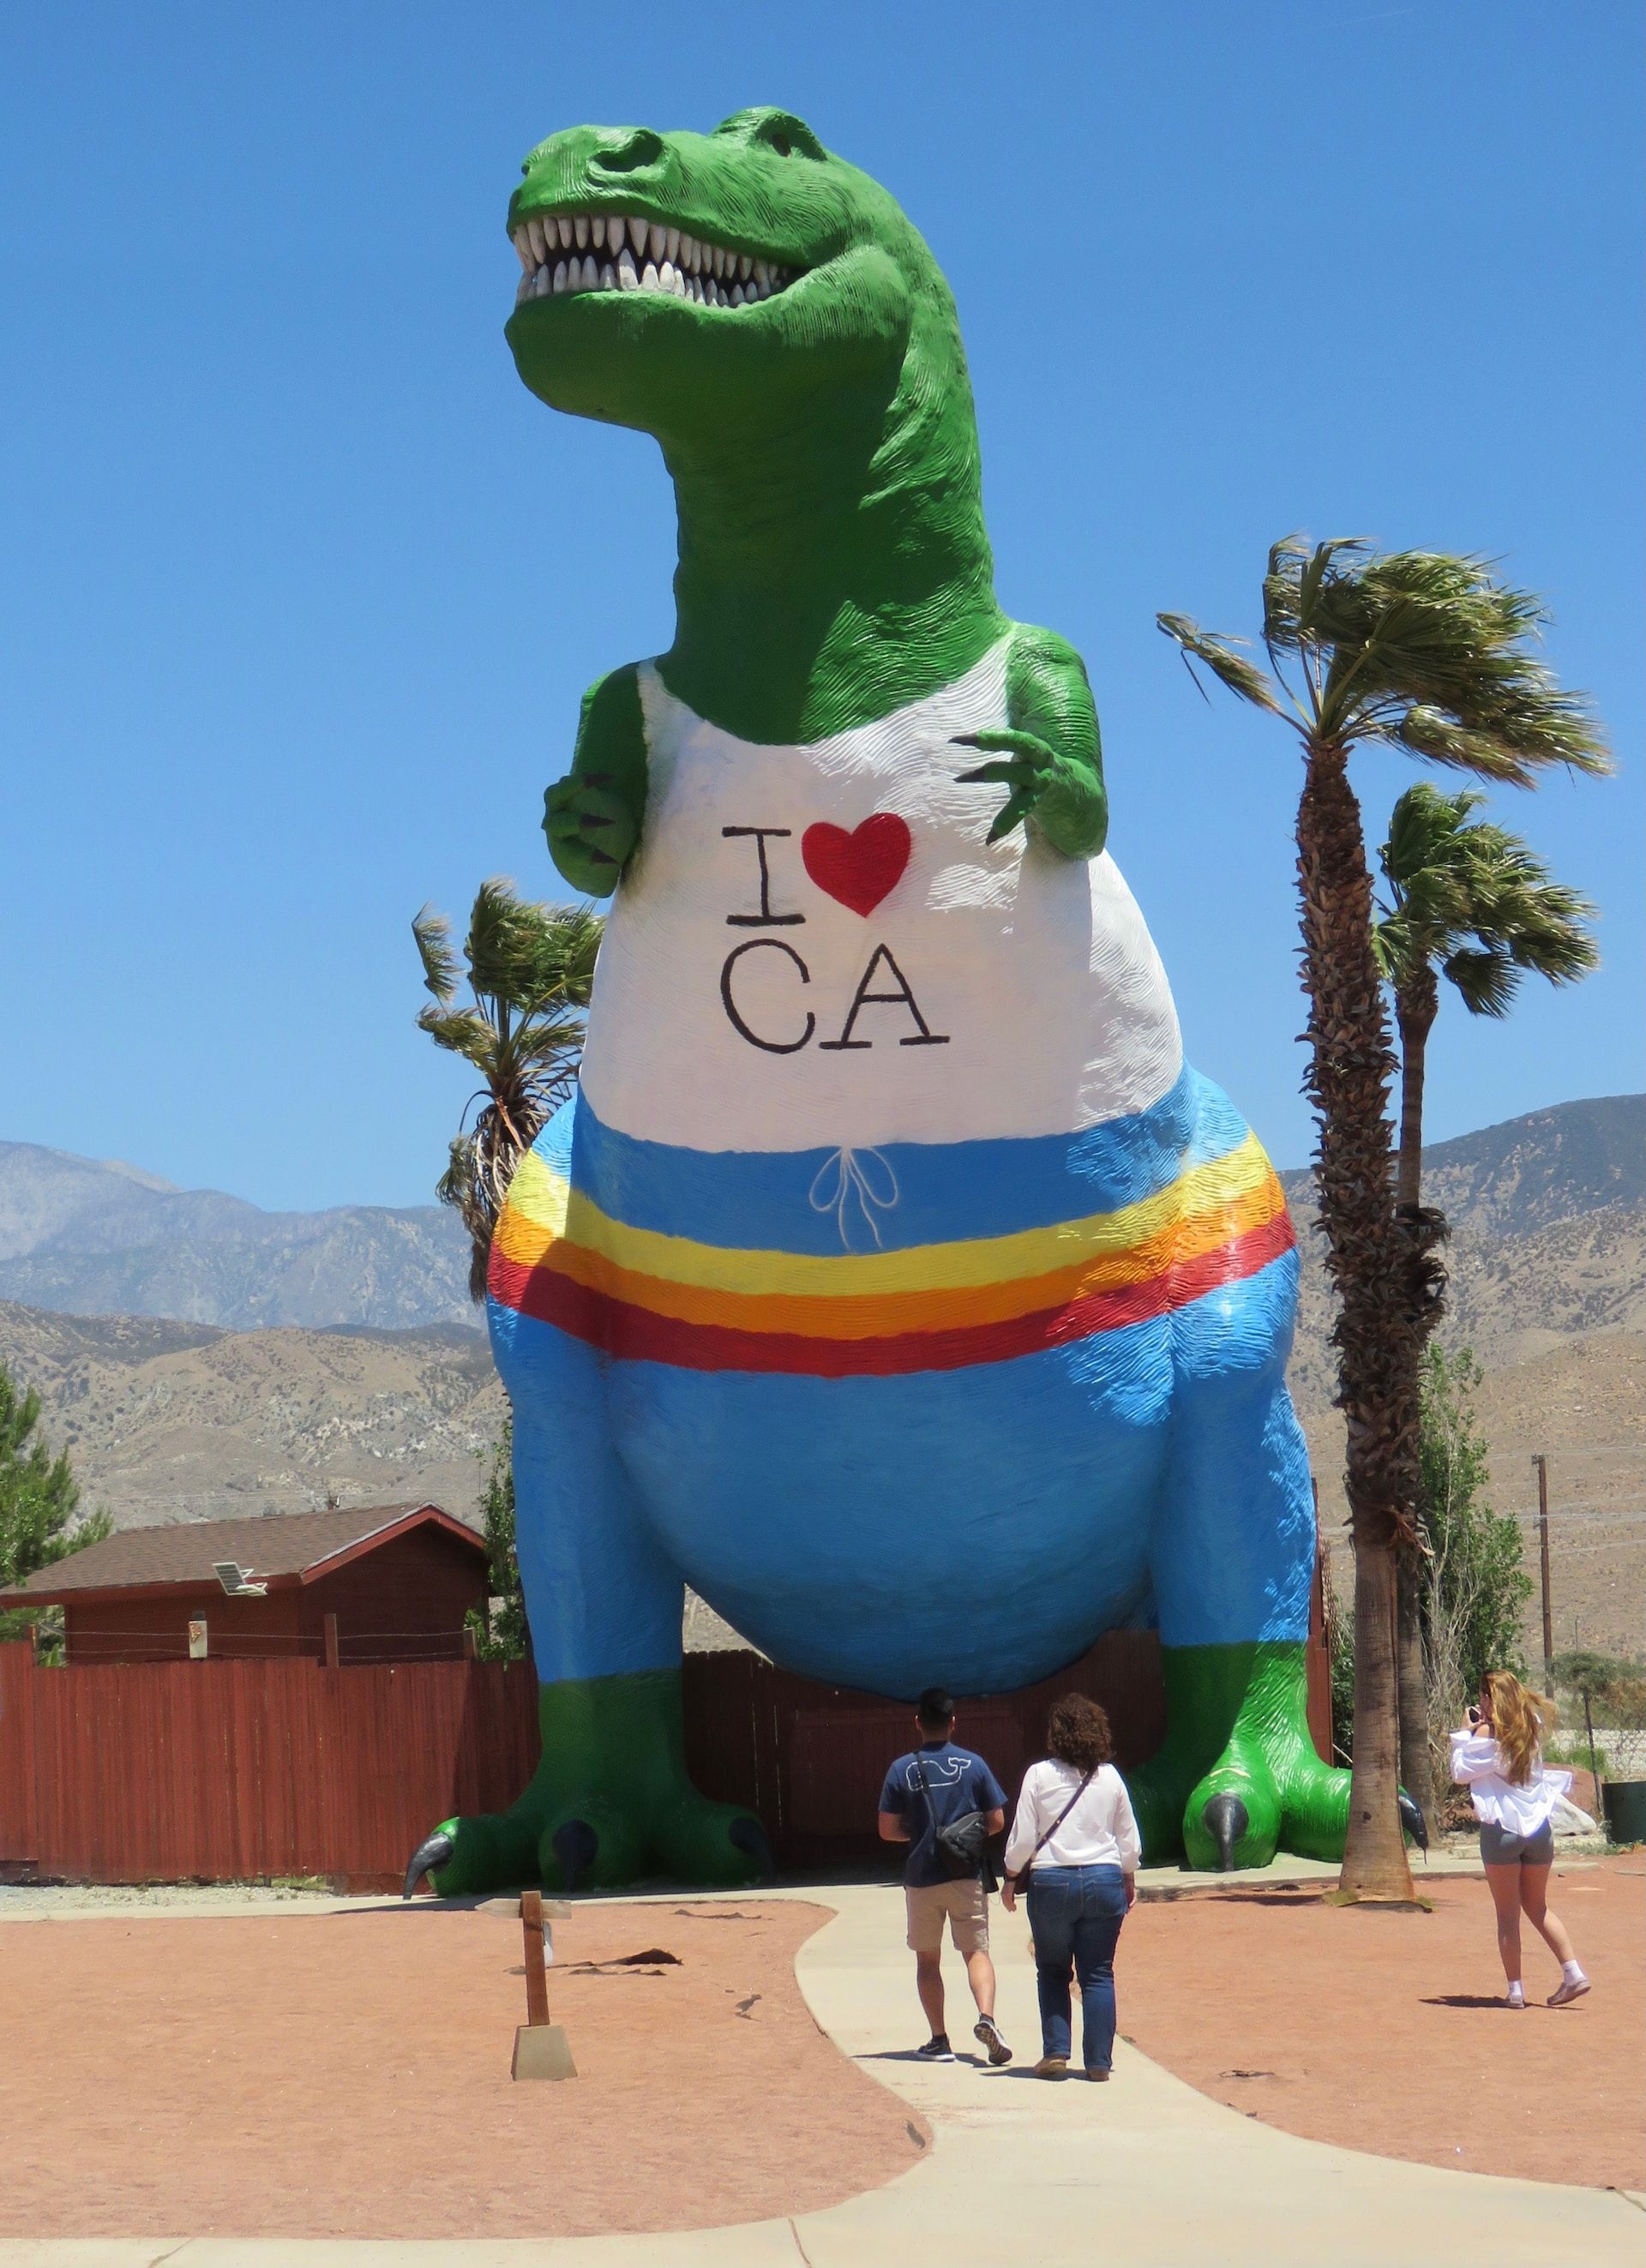 "Mr. Rex" is one of the two Cabazon Dinosaurs roadside attraction on Interstate 10 near Palm Springs, California 